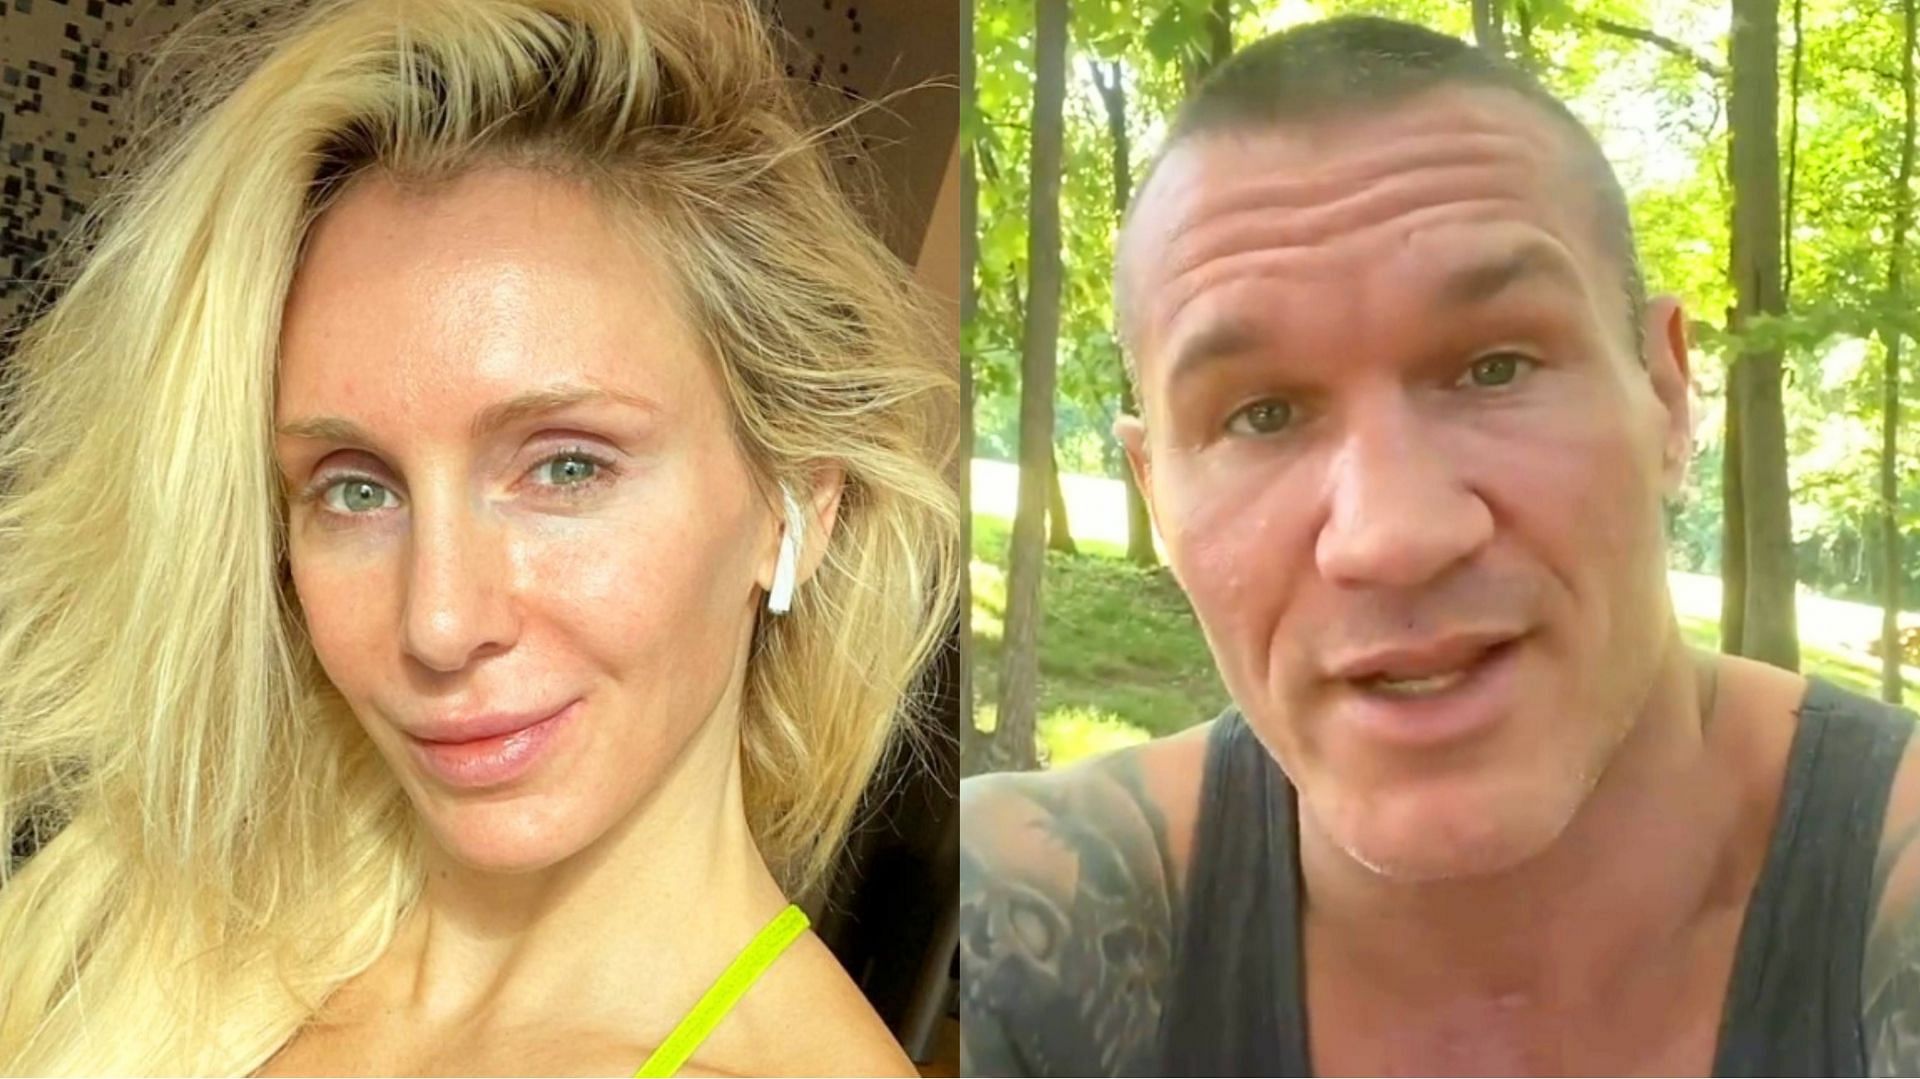 Charlotte Flair (left) and Randy Orton (right) are major stars in WWE